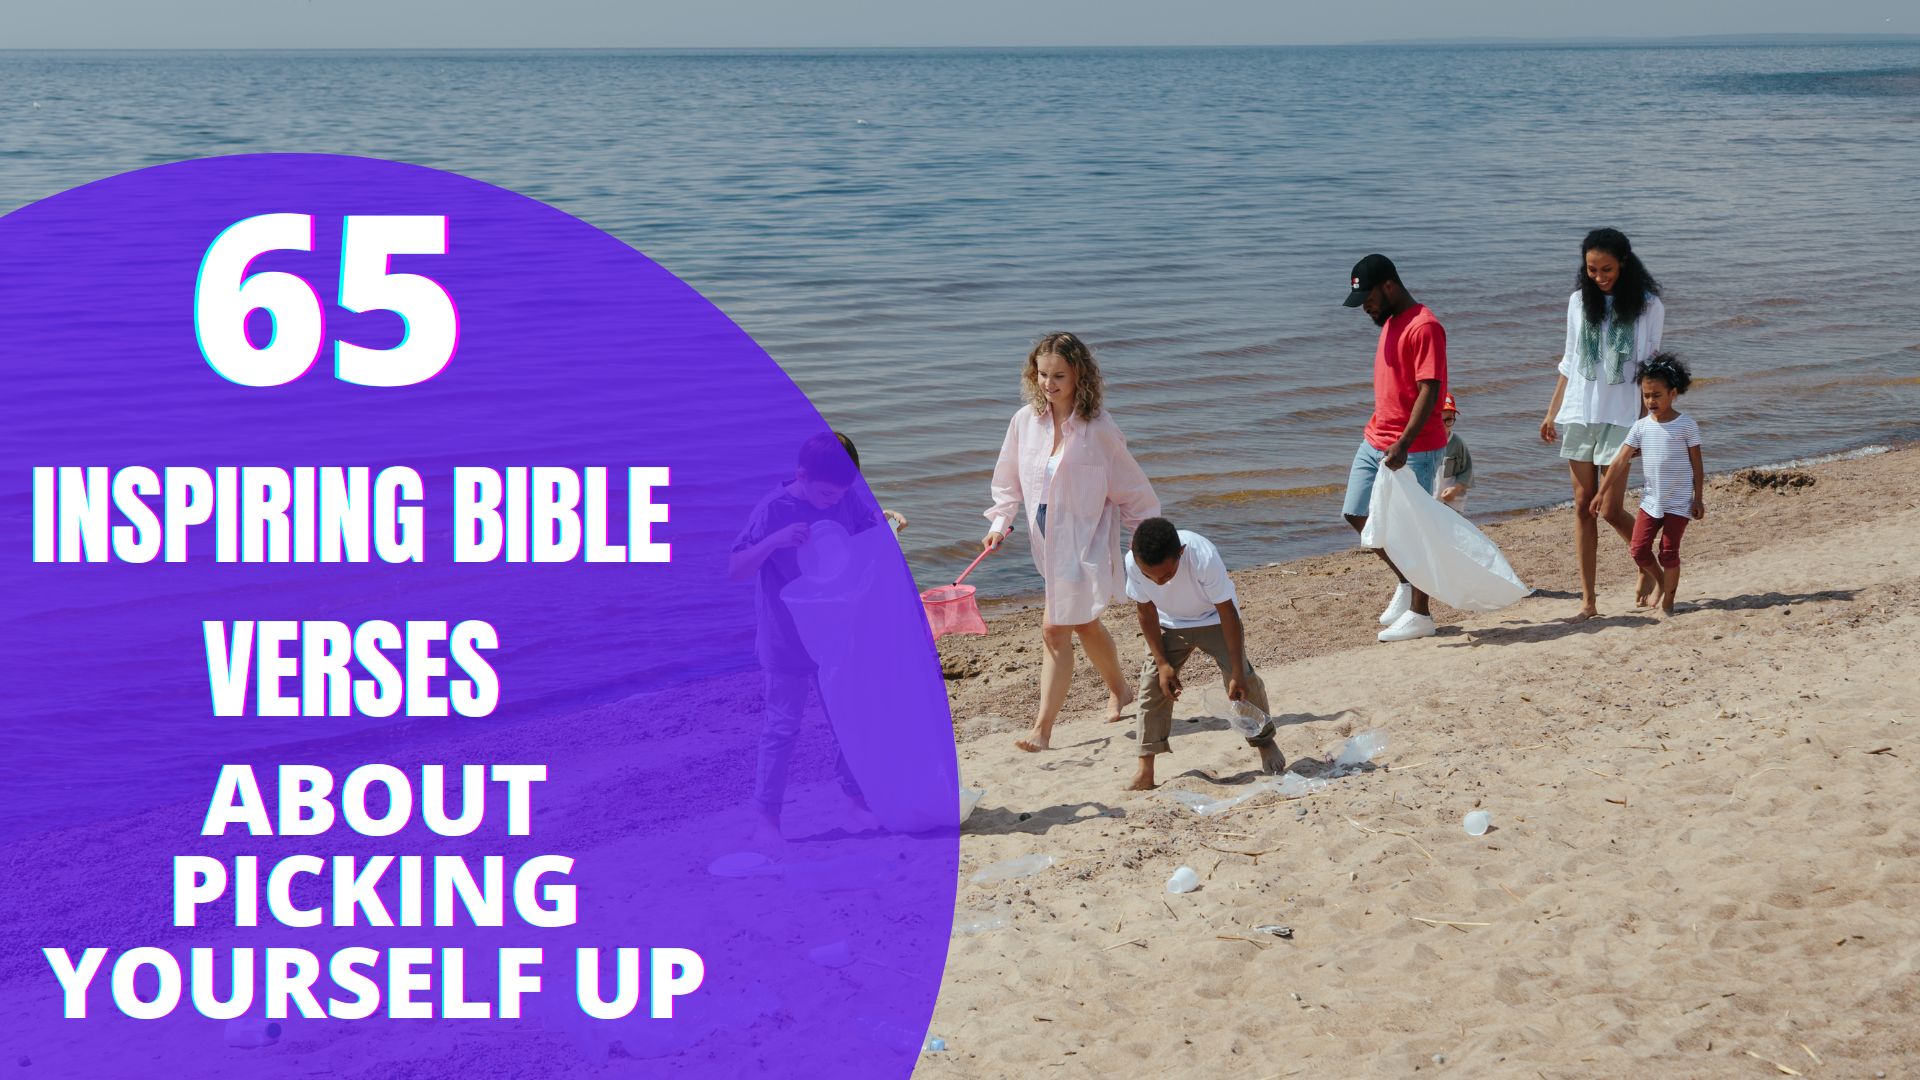 65 Inspiring Bible Verses About Picking Yourself Up